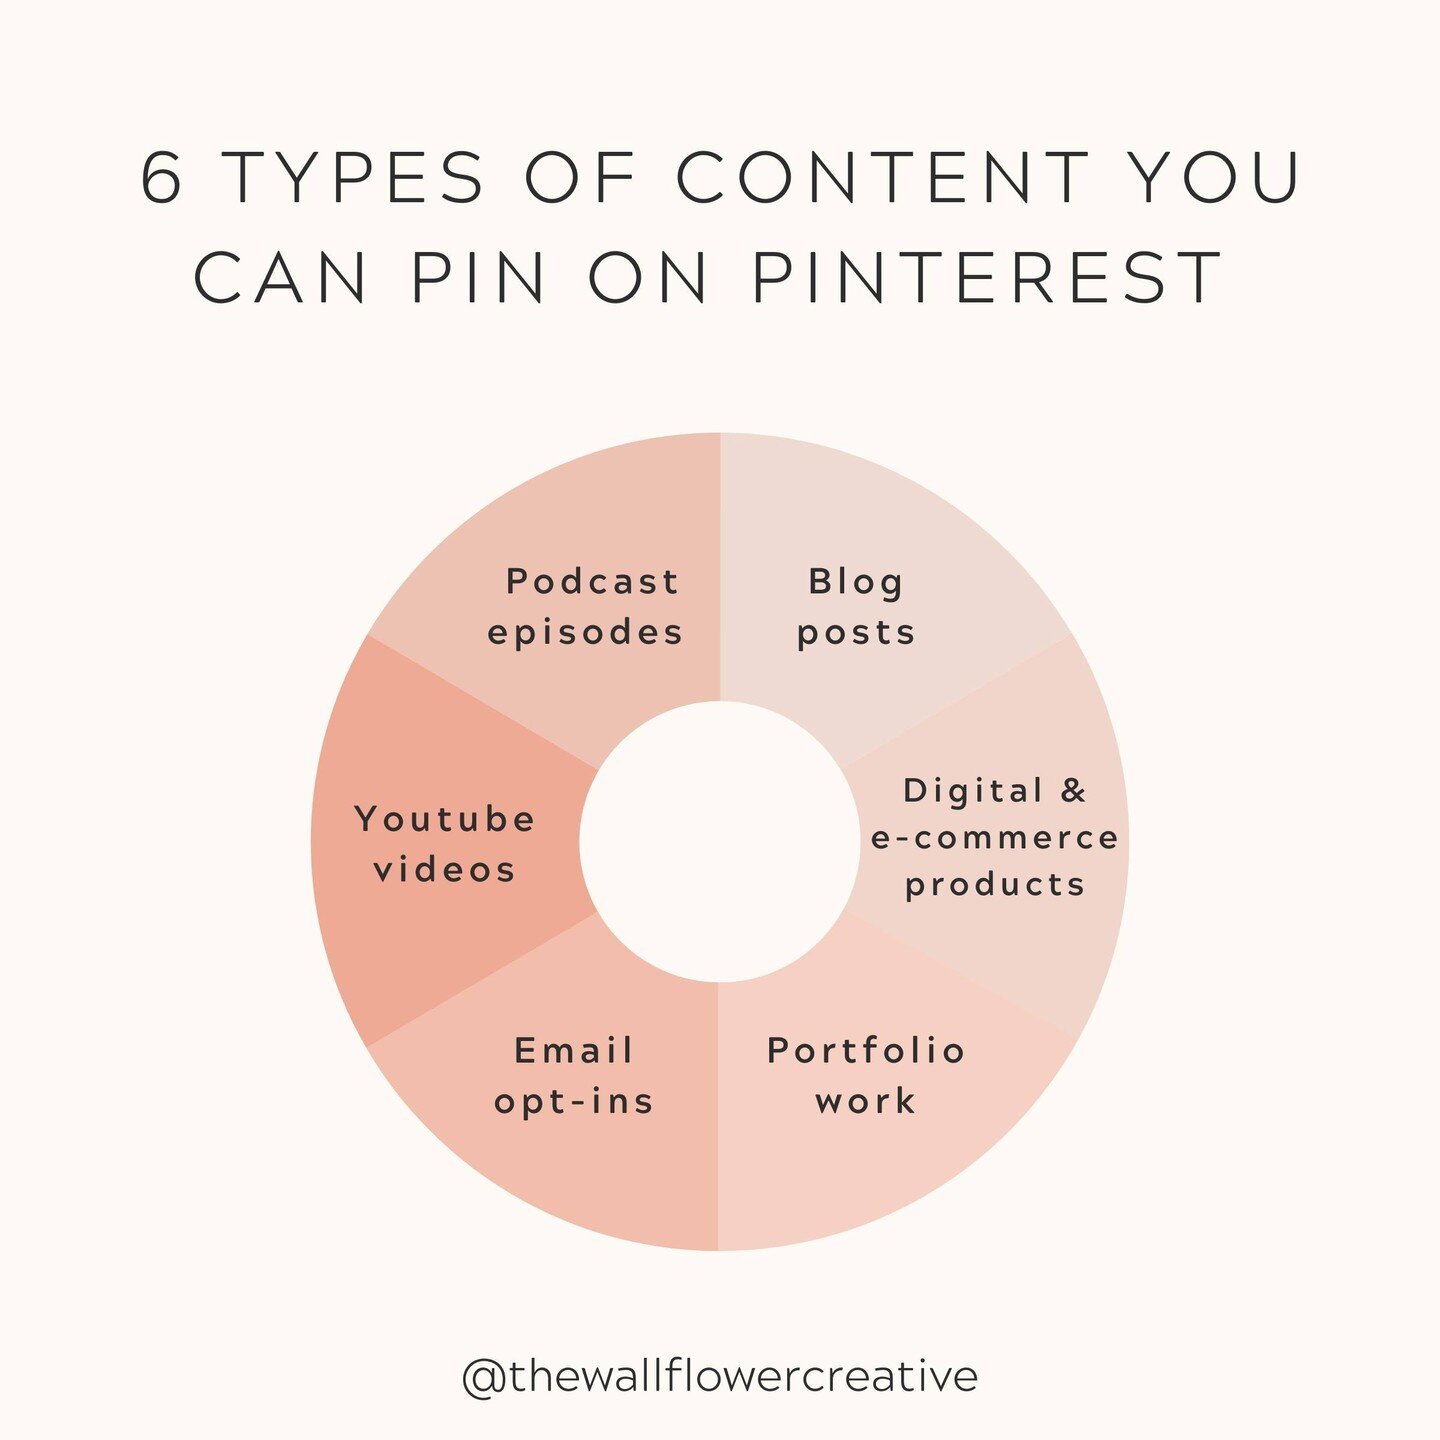 You won't believe this, but Pinterest isn't just for bloggers.

Shocker, I know! 🤯

Pinterest isn't just a place for home decor ideas, recipes, or blog posts. There's a whole treasure trove of diverse content on Pinterest that its pinners love to se